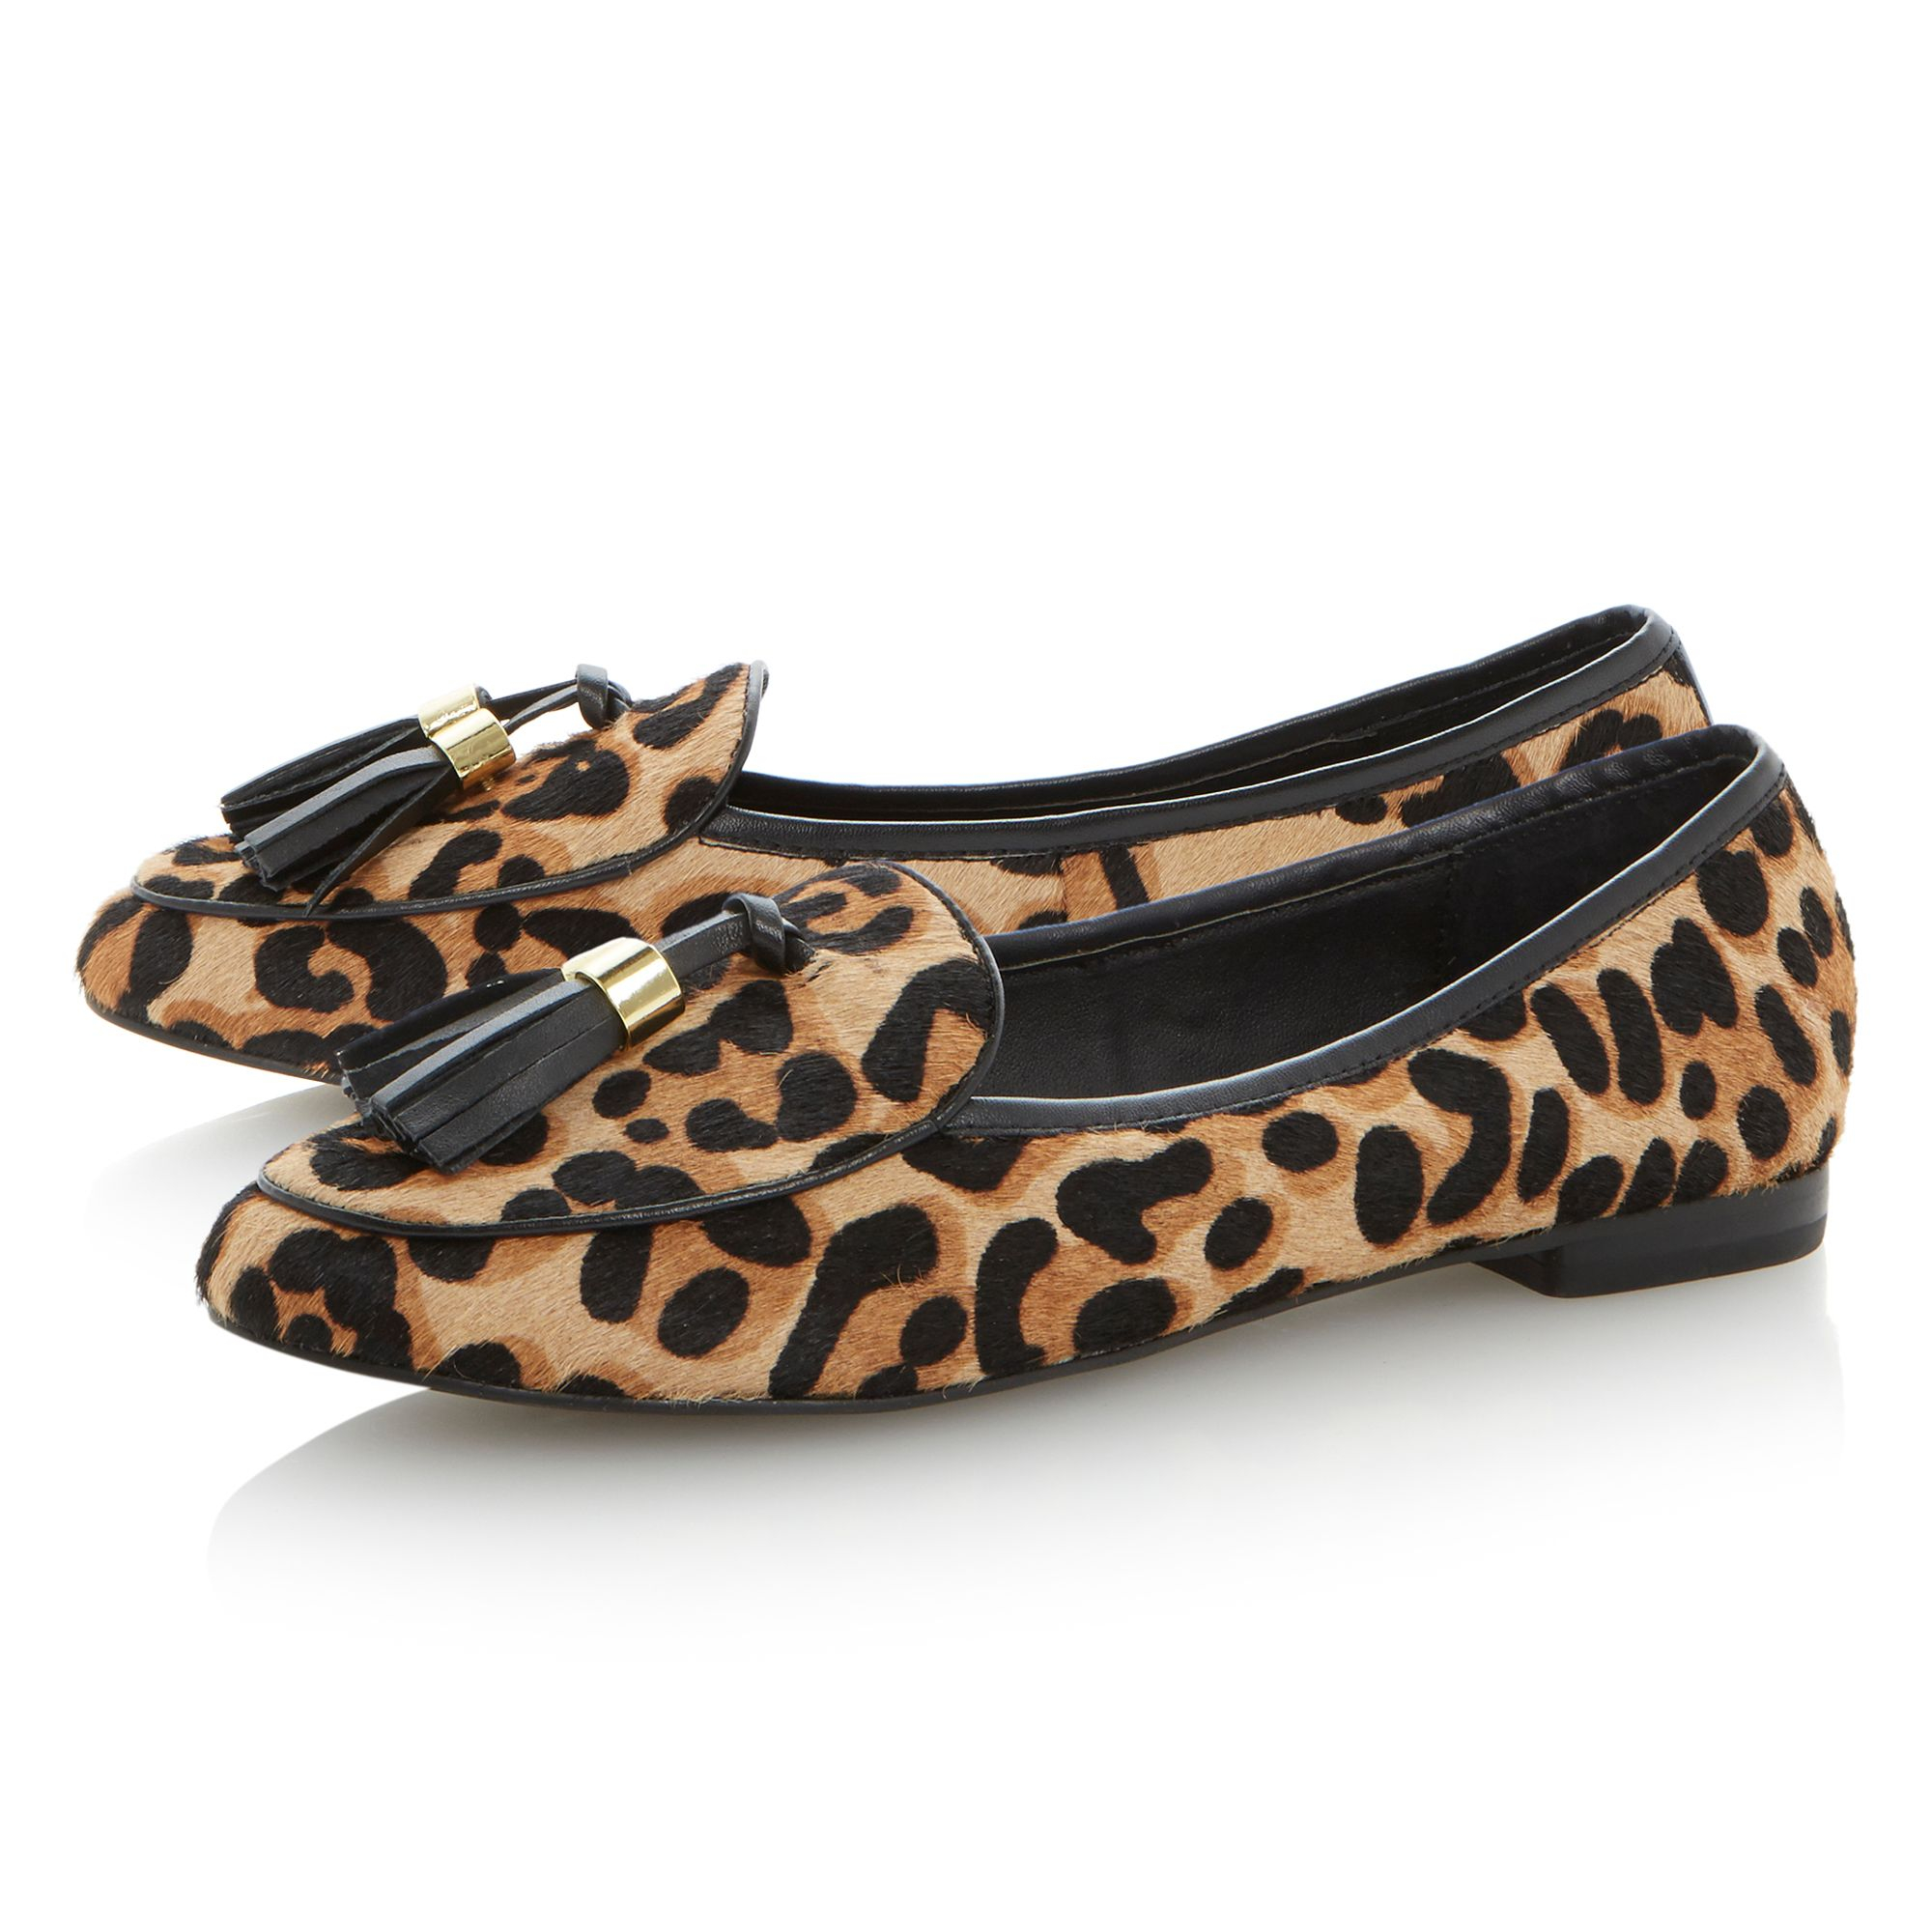 Steve Madden Lunni Pony Almond Toe Loafer Shoes in Animal (Leopard ...